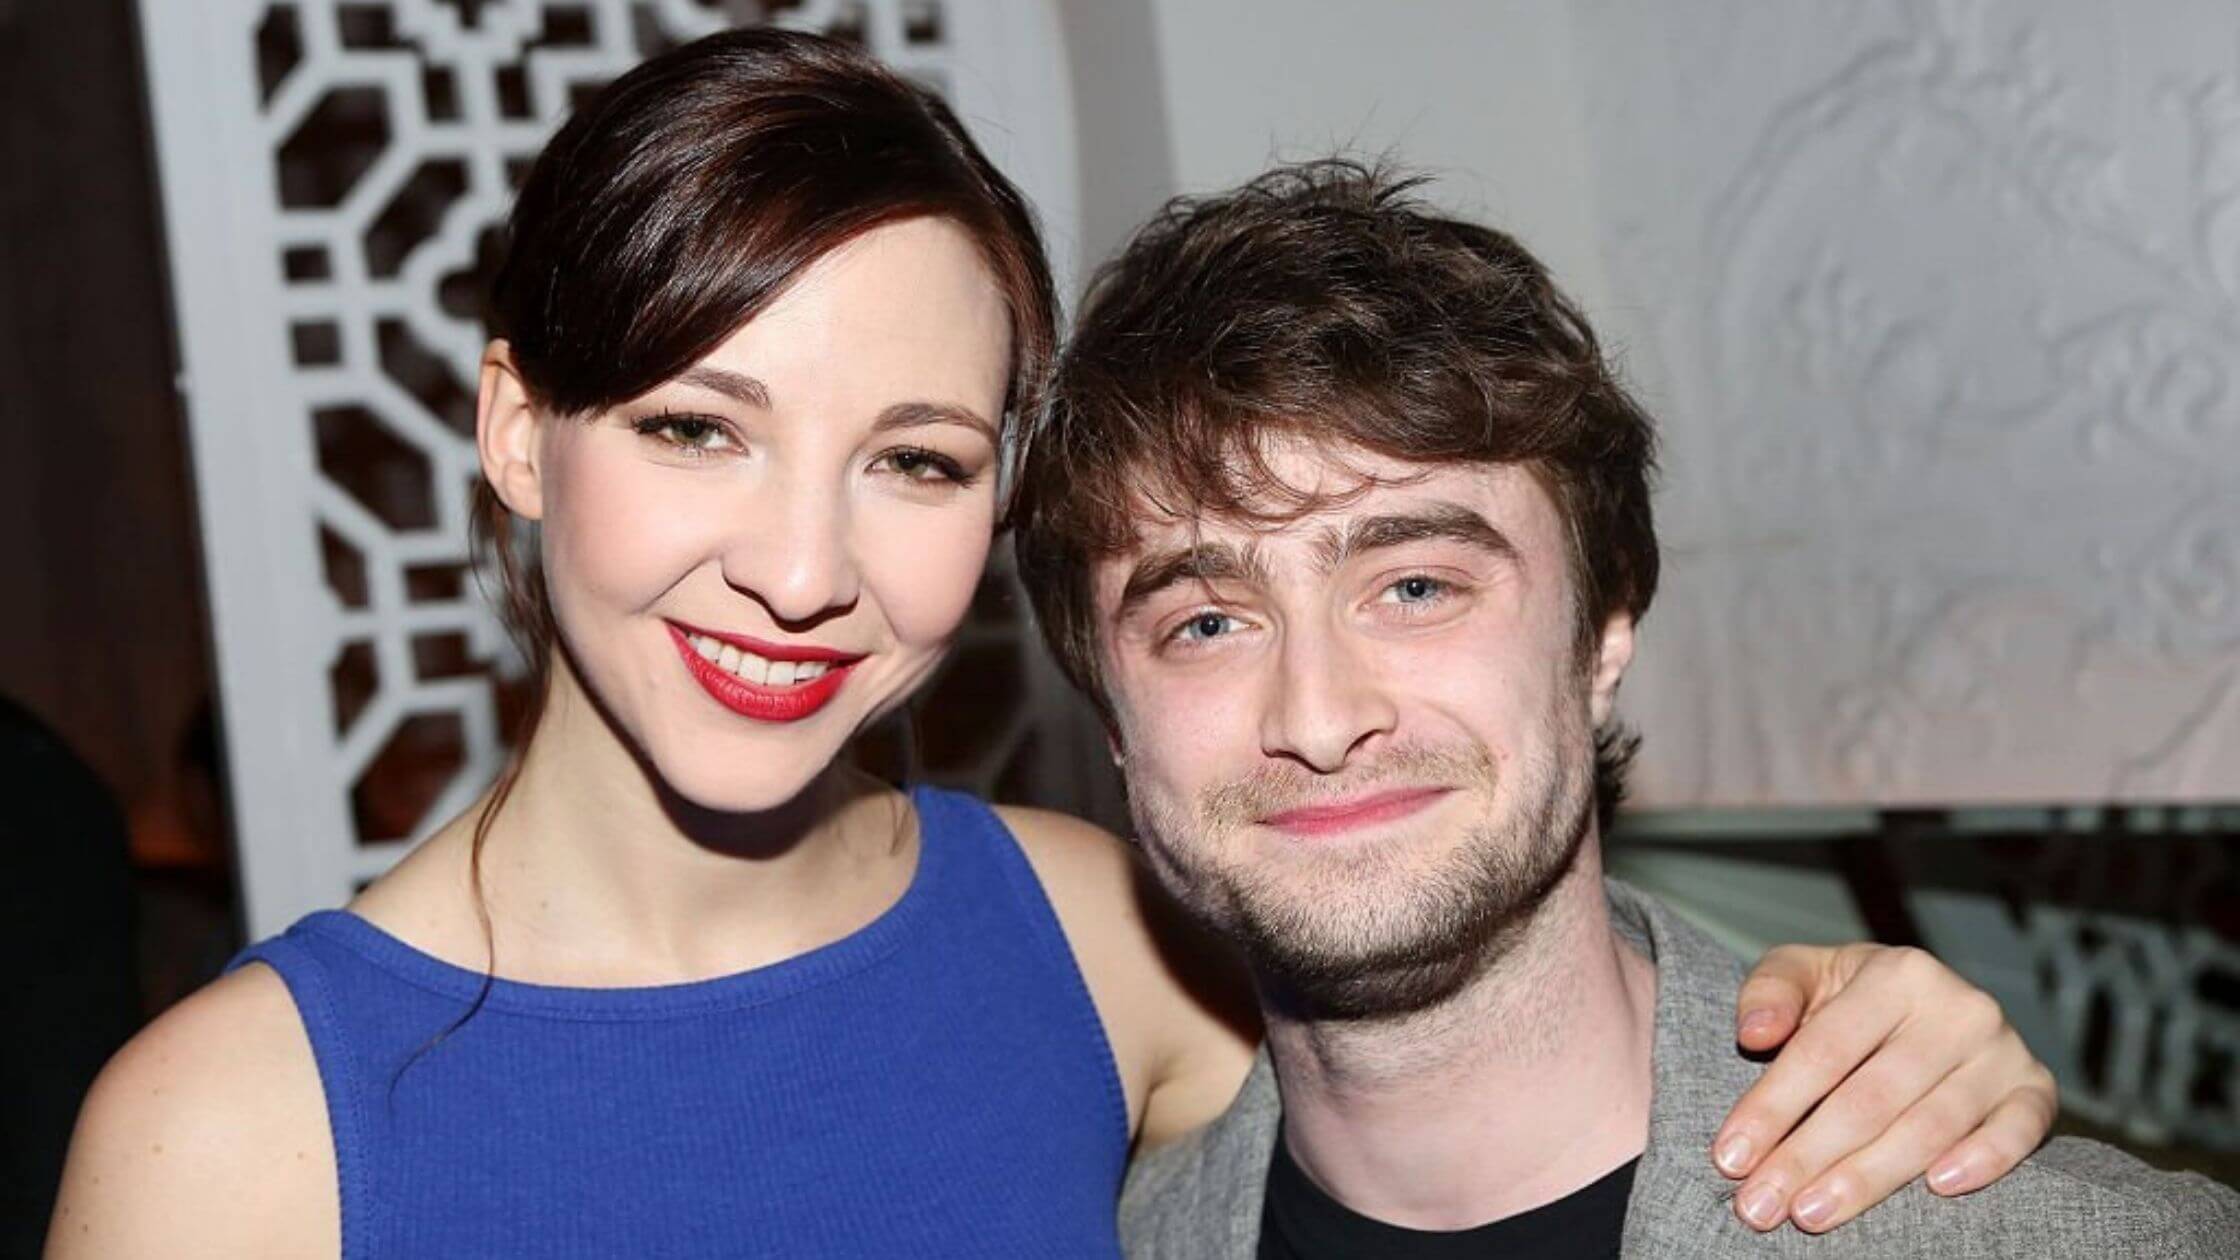 Daniel Radcliffe Passes Bizarre Comment About Girlfriend Erin Darke And Dealt With It Nicely With His Charm